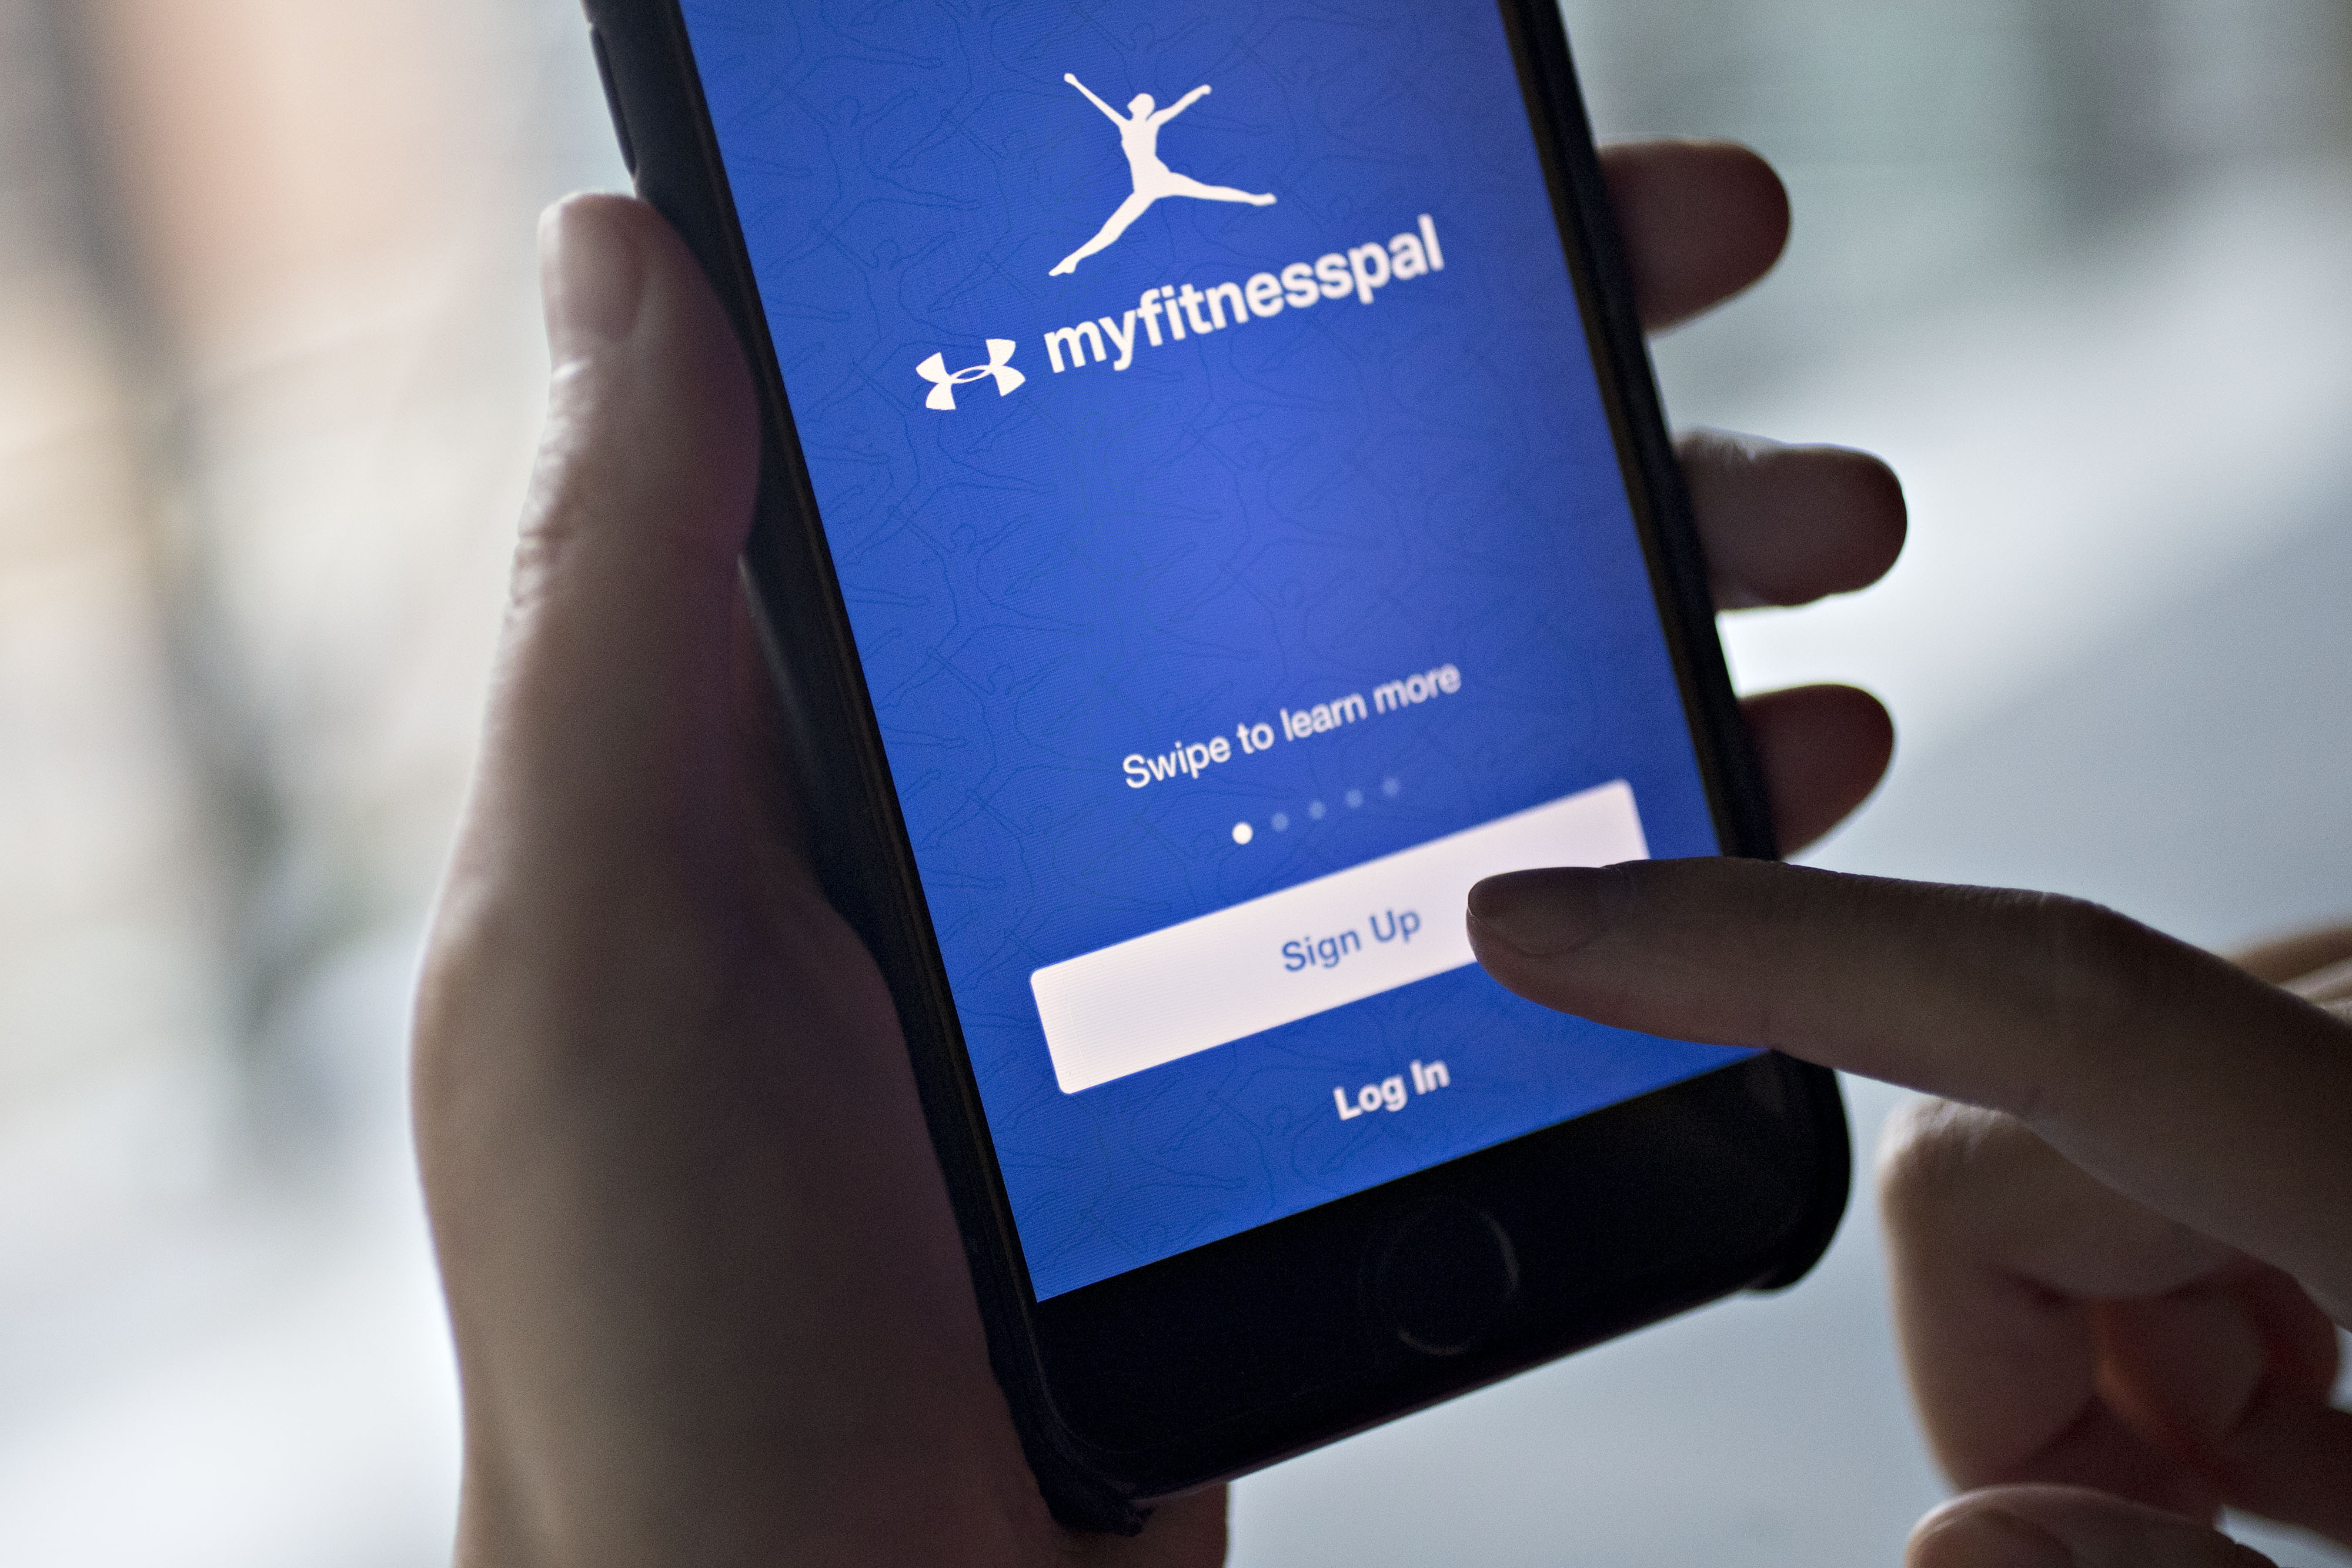 The MyFitnessPal application is demonstrated for a photograph on an Apple Inc. iPhone in Washington, D.C., U.S., on Monday, Oct. 24, 2016. Under Armour Inc., which acquired MyFitnessPal in early 2016, is expected to release third-quarter earnings figures on October 25. (Photograph by Andrew Harrer—Bloomberg/Getty Images)